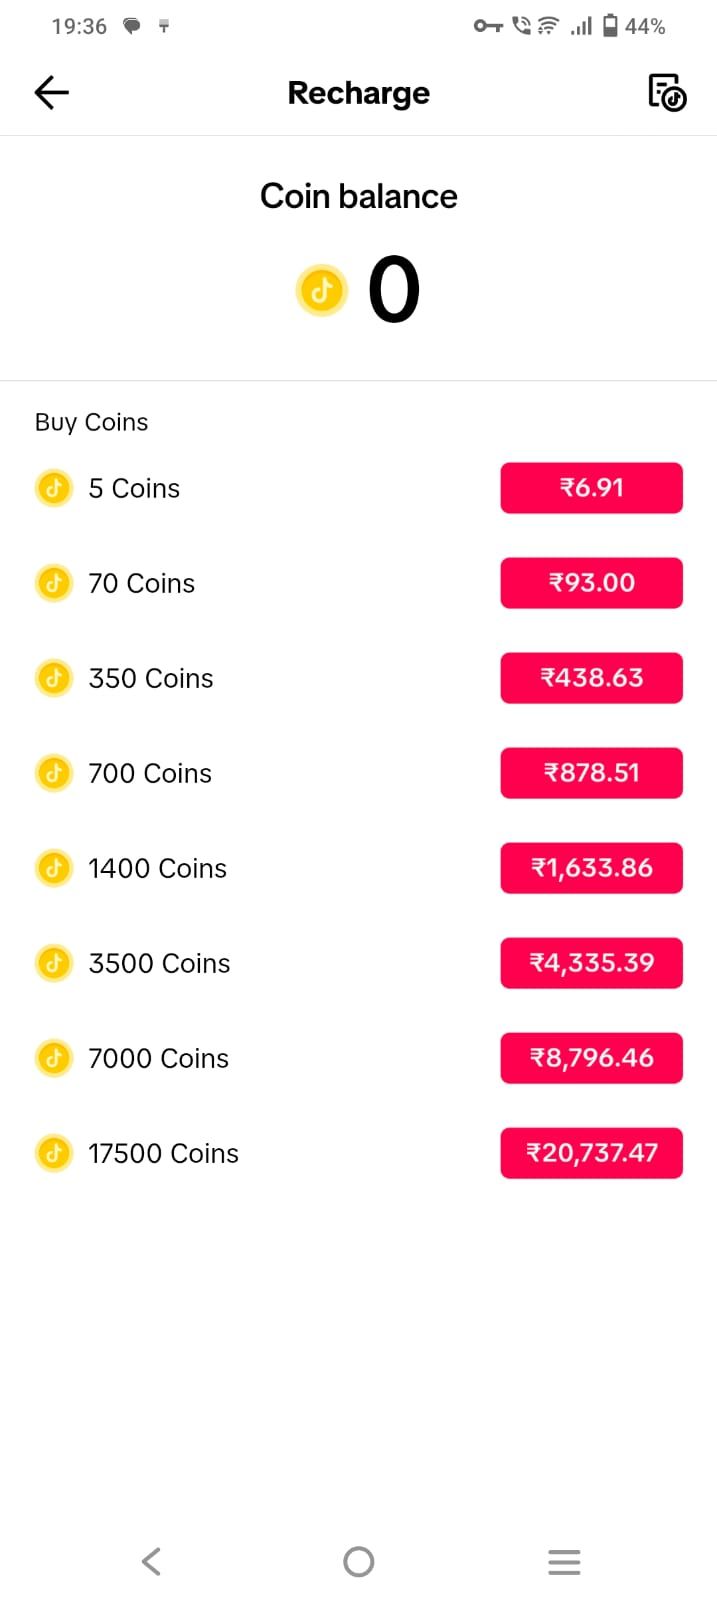 Screenshot of the Recharge page on the TikTok app